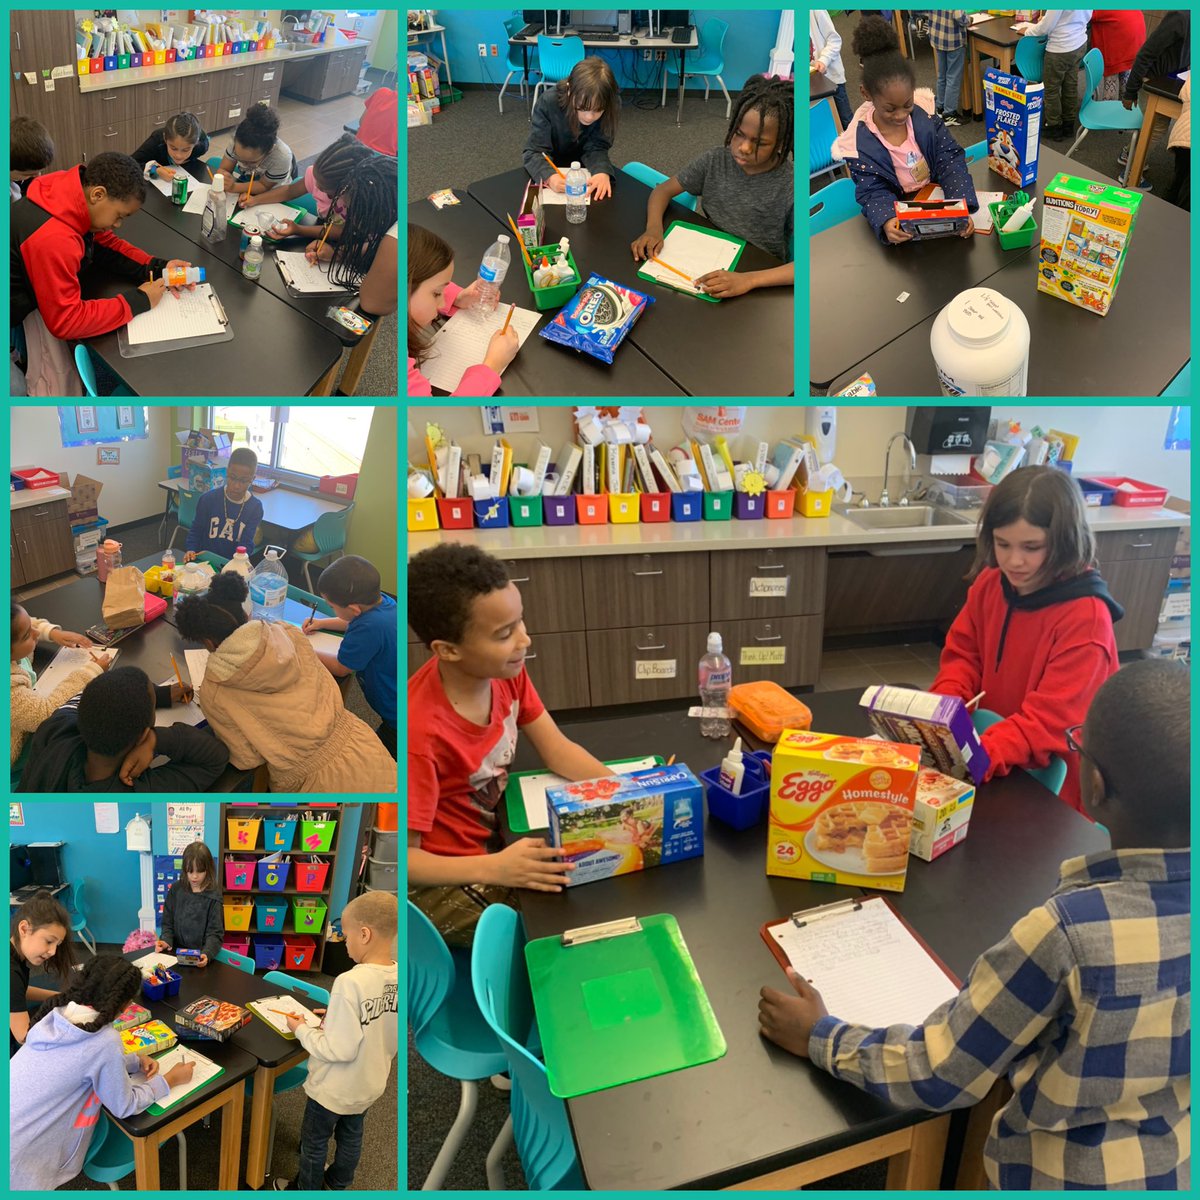 #measurement is in full effect in #thirdgrade. TY to our parents for providing #realworldexamples for our scholars to learn about units of measurement, #weight and #capacity. @HumbleISD_RCE #cubcommUNITY #mathmatters